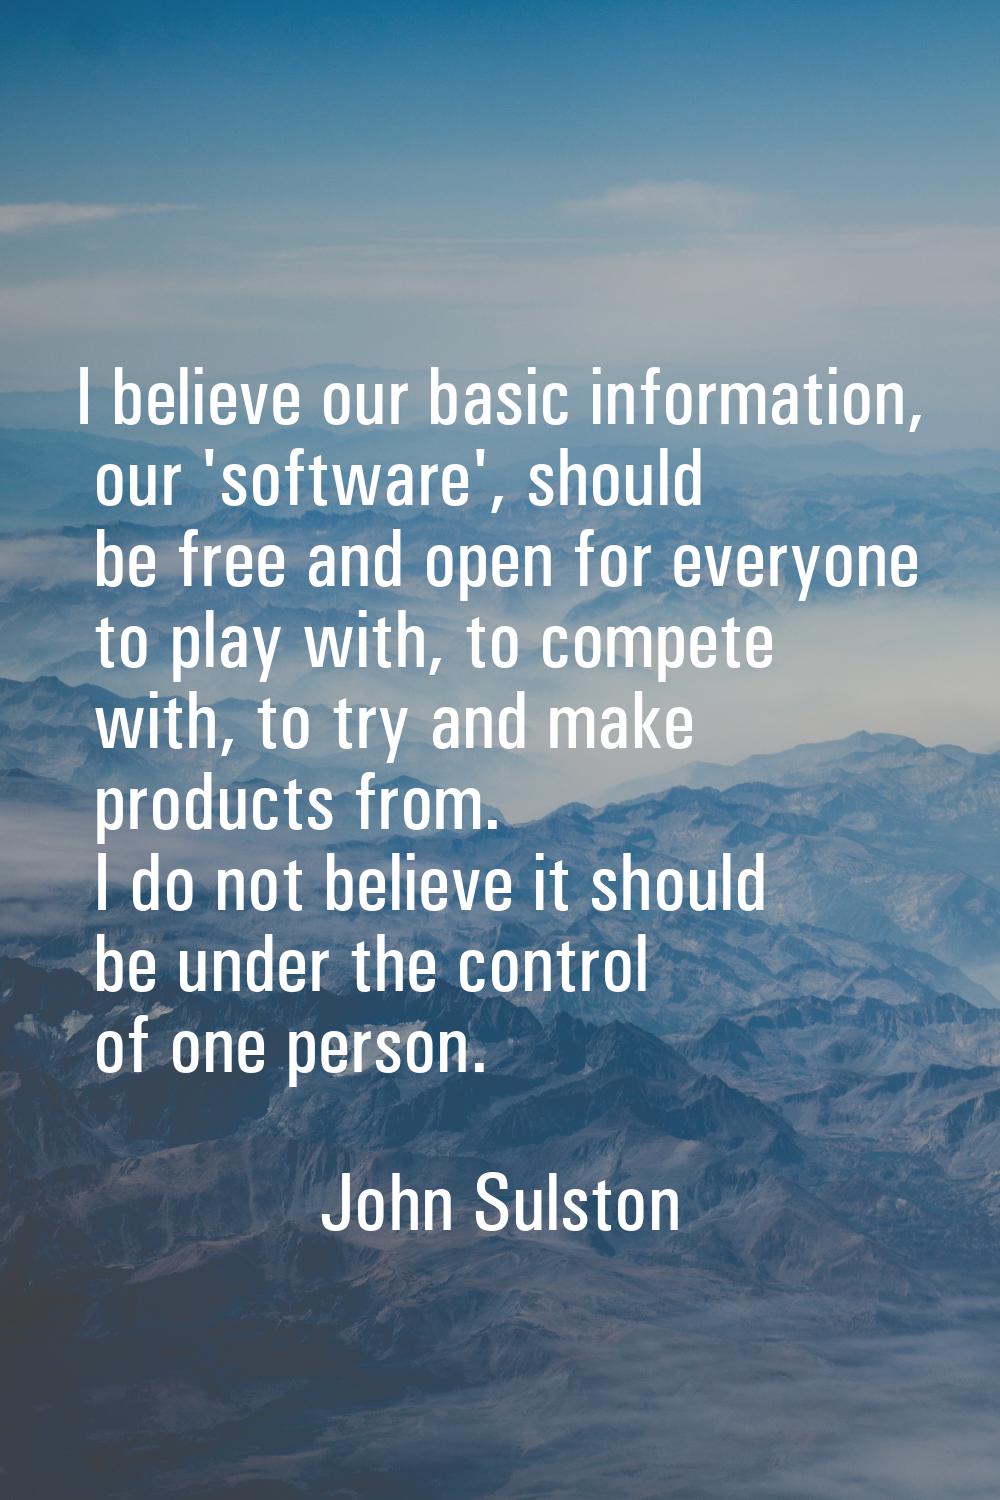 I believe our basic information, our 'software', should be free and open for everyone to play with,